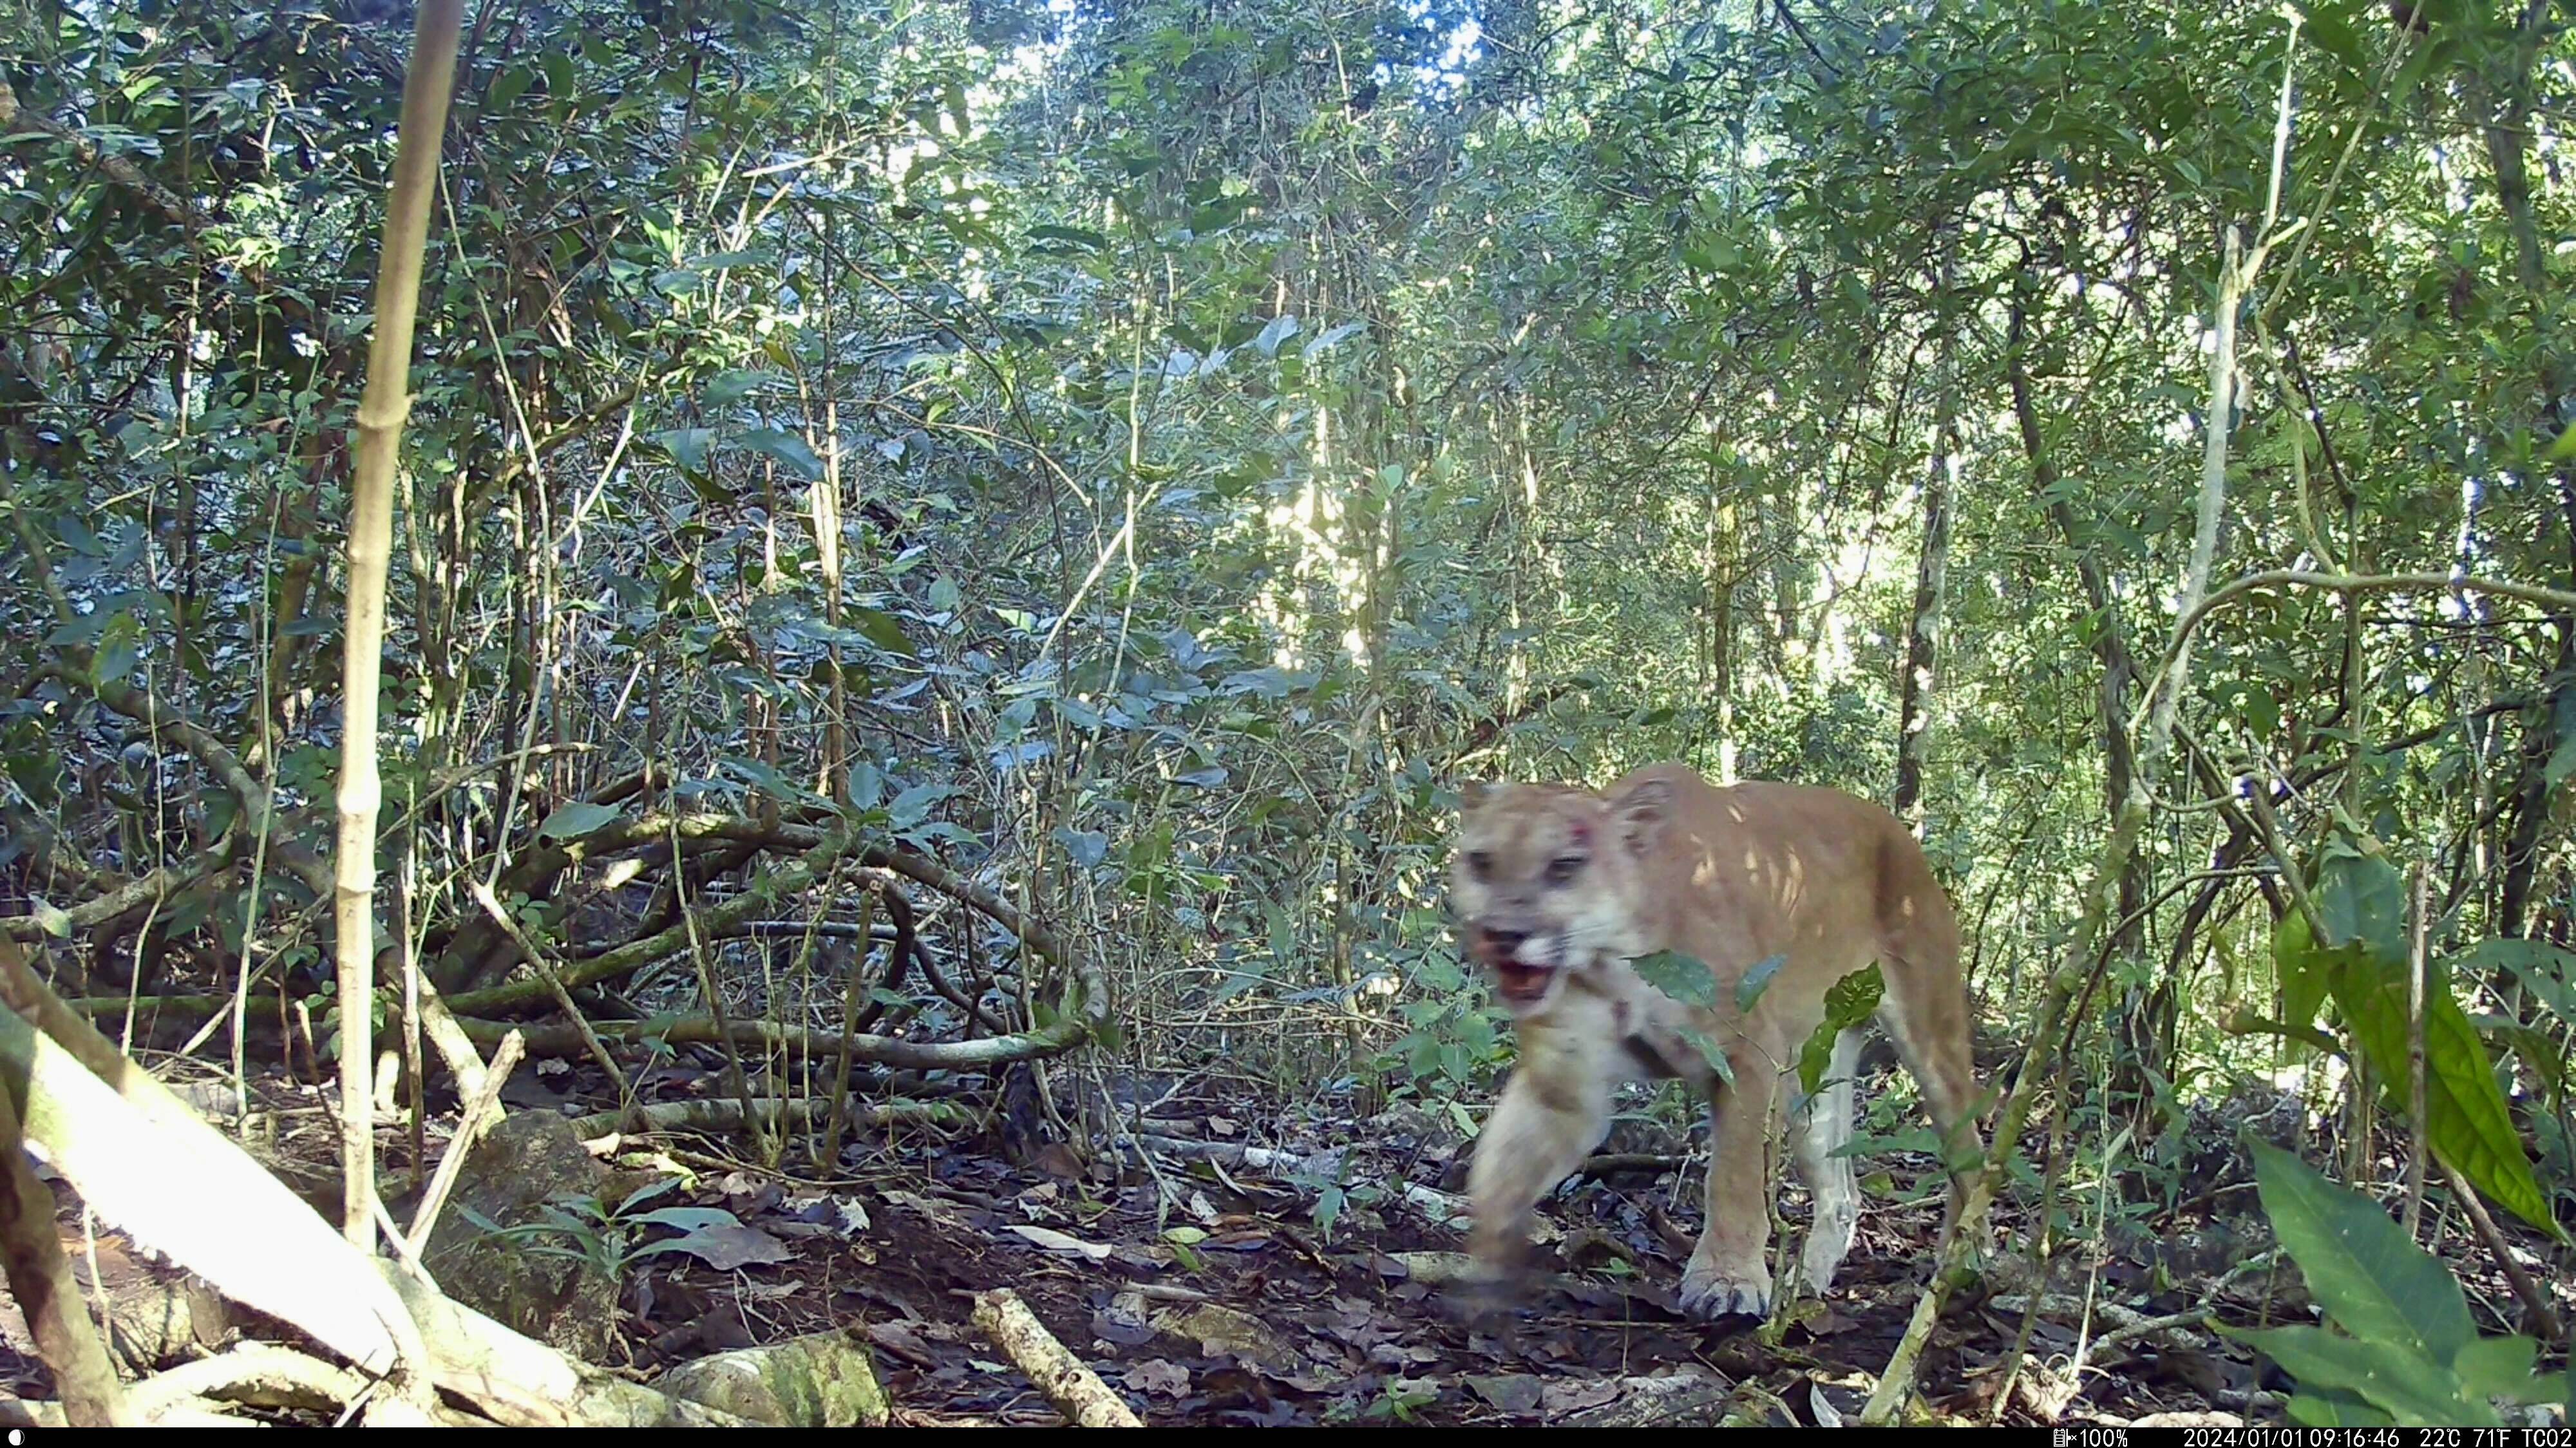 Trail camera photo showing a puma walking on the forest floor towards the camera.